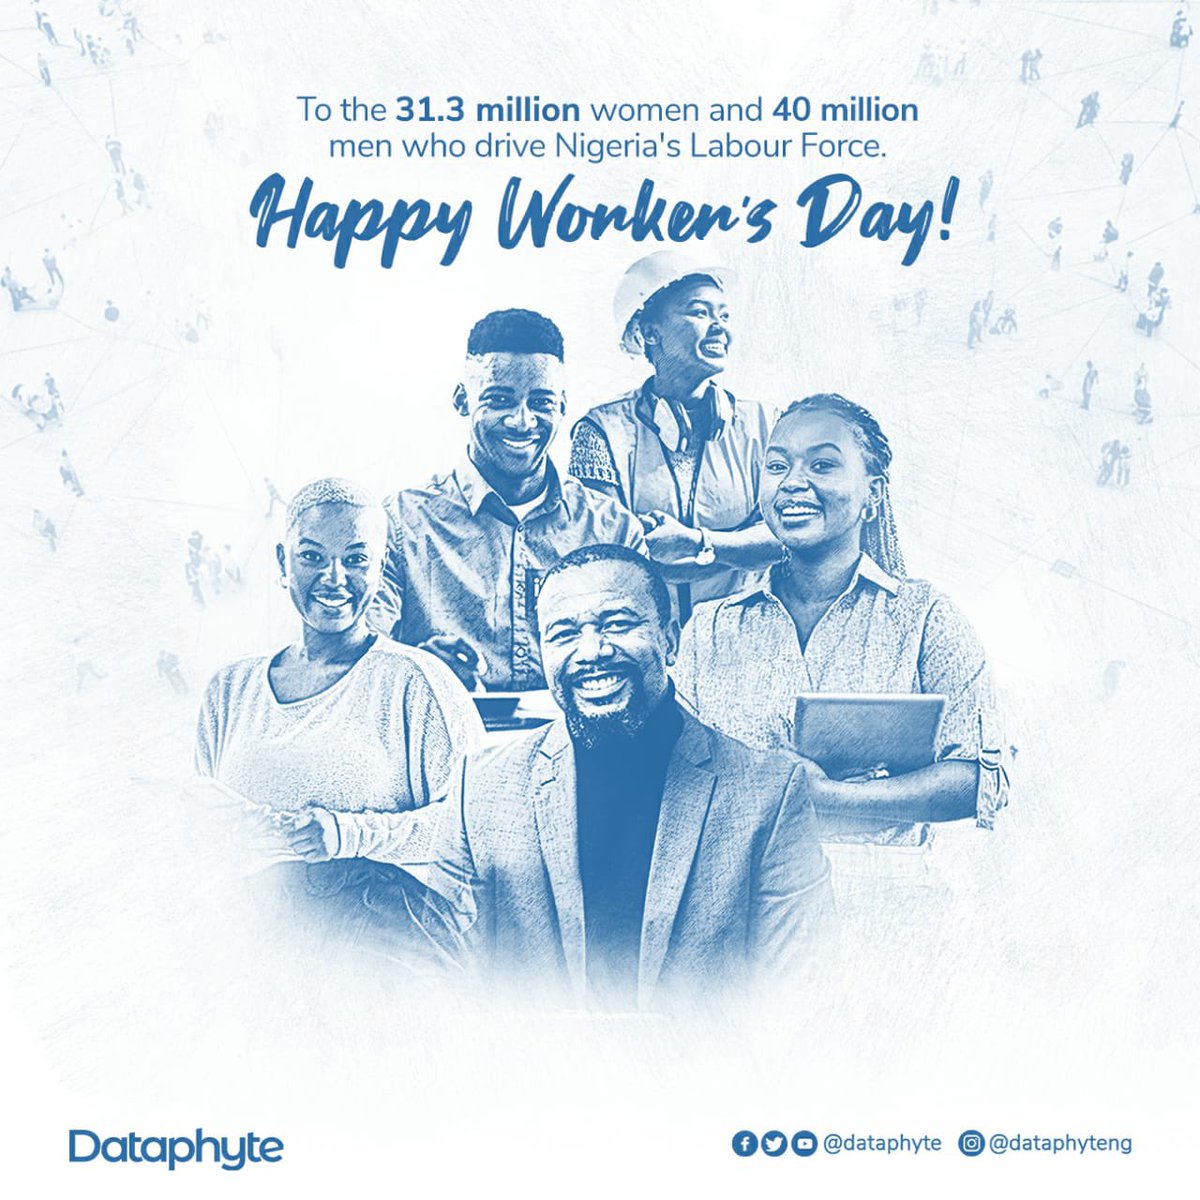 Today, we celebrate the backbone of Nigeria's workforce – the 31.3 million incredible women and 40 million amazing men who pour their hearts into every task, every day, shaping their families, communities, and our nation. Thank you for your invaluable contributions to our